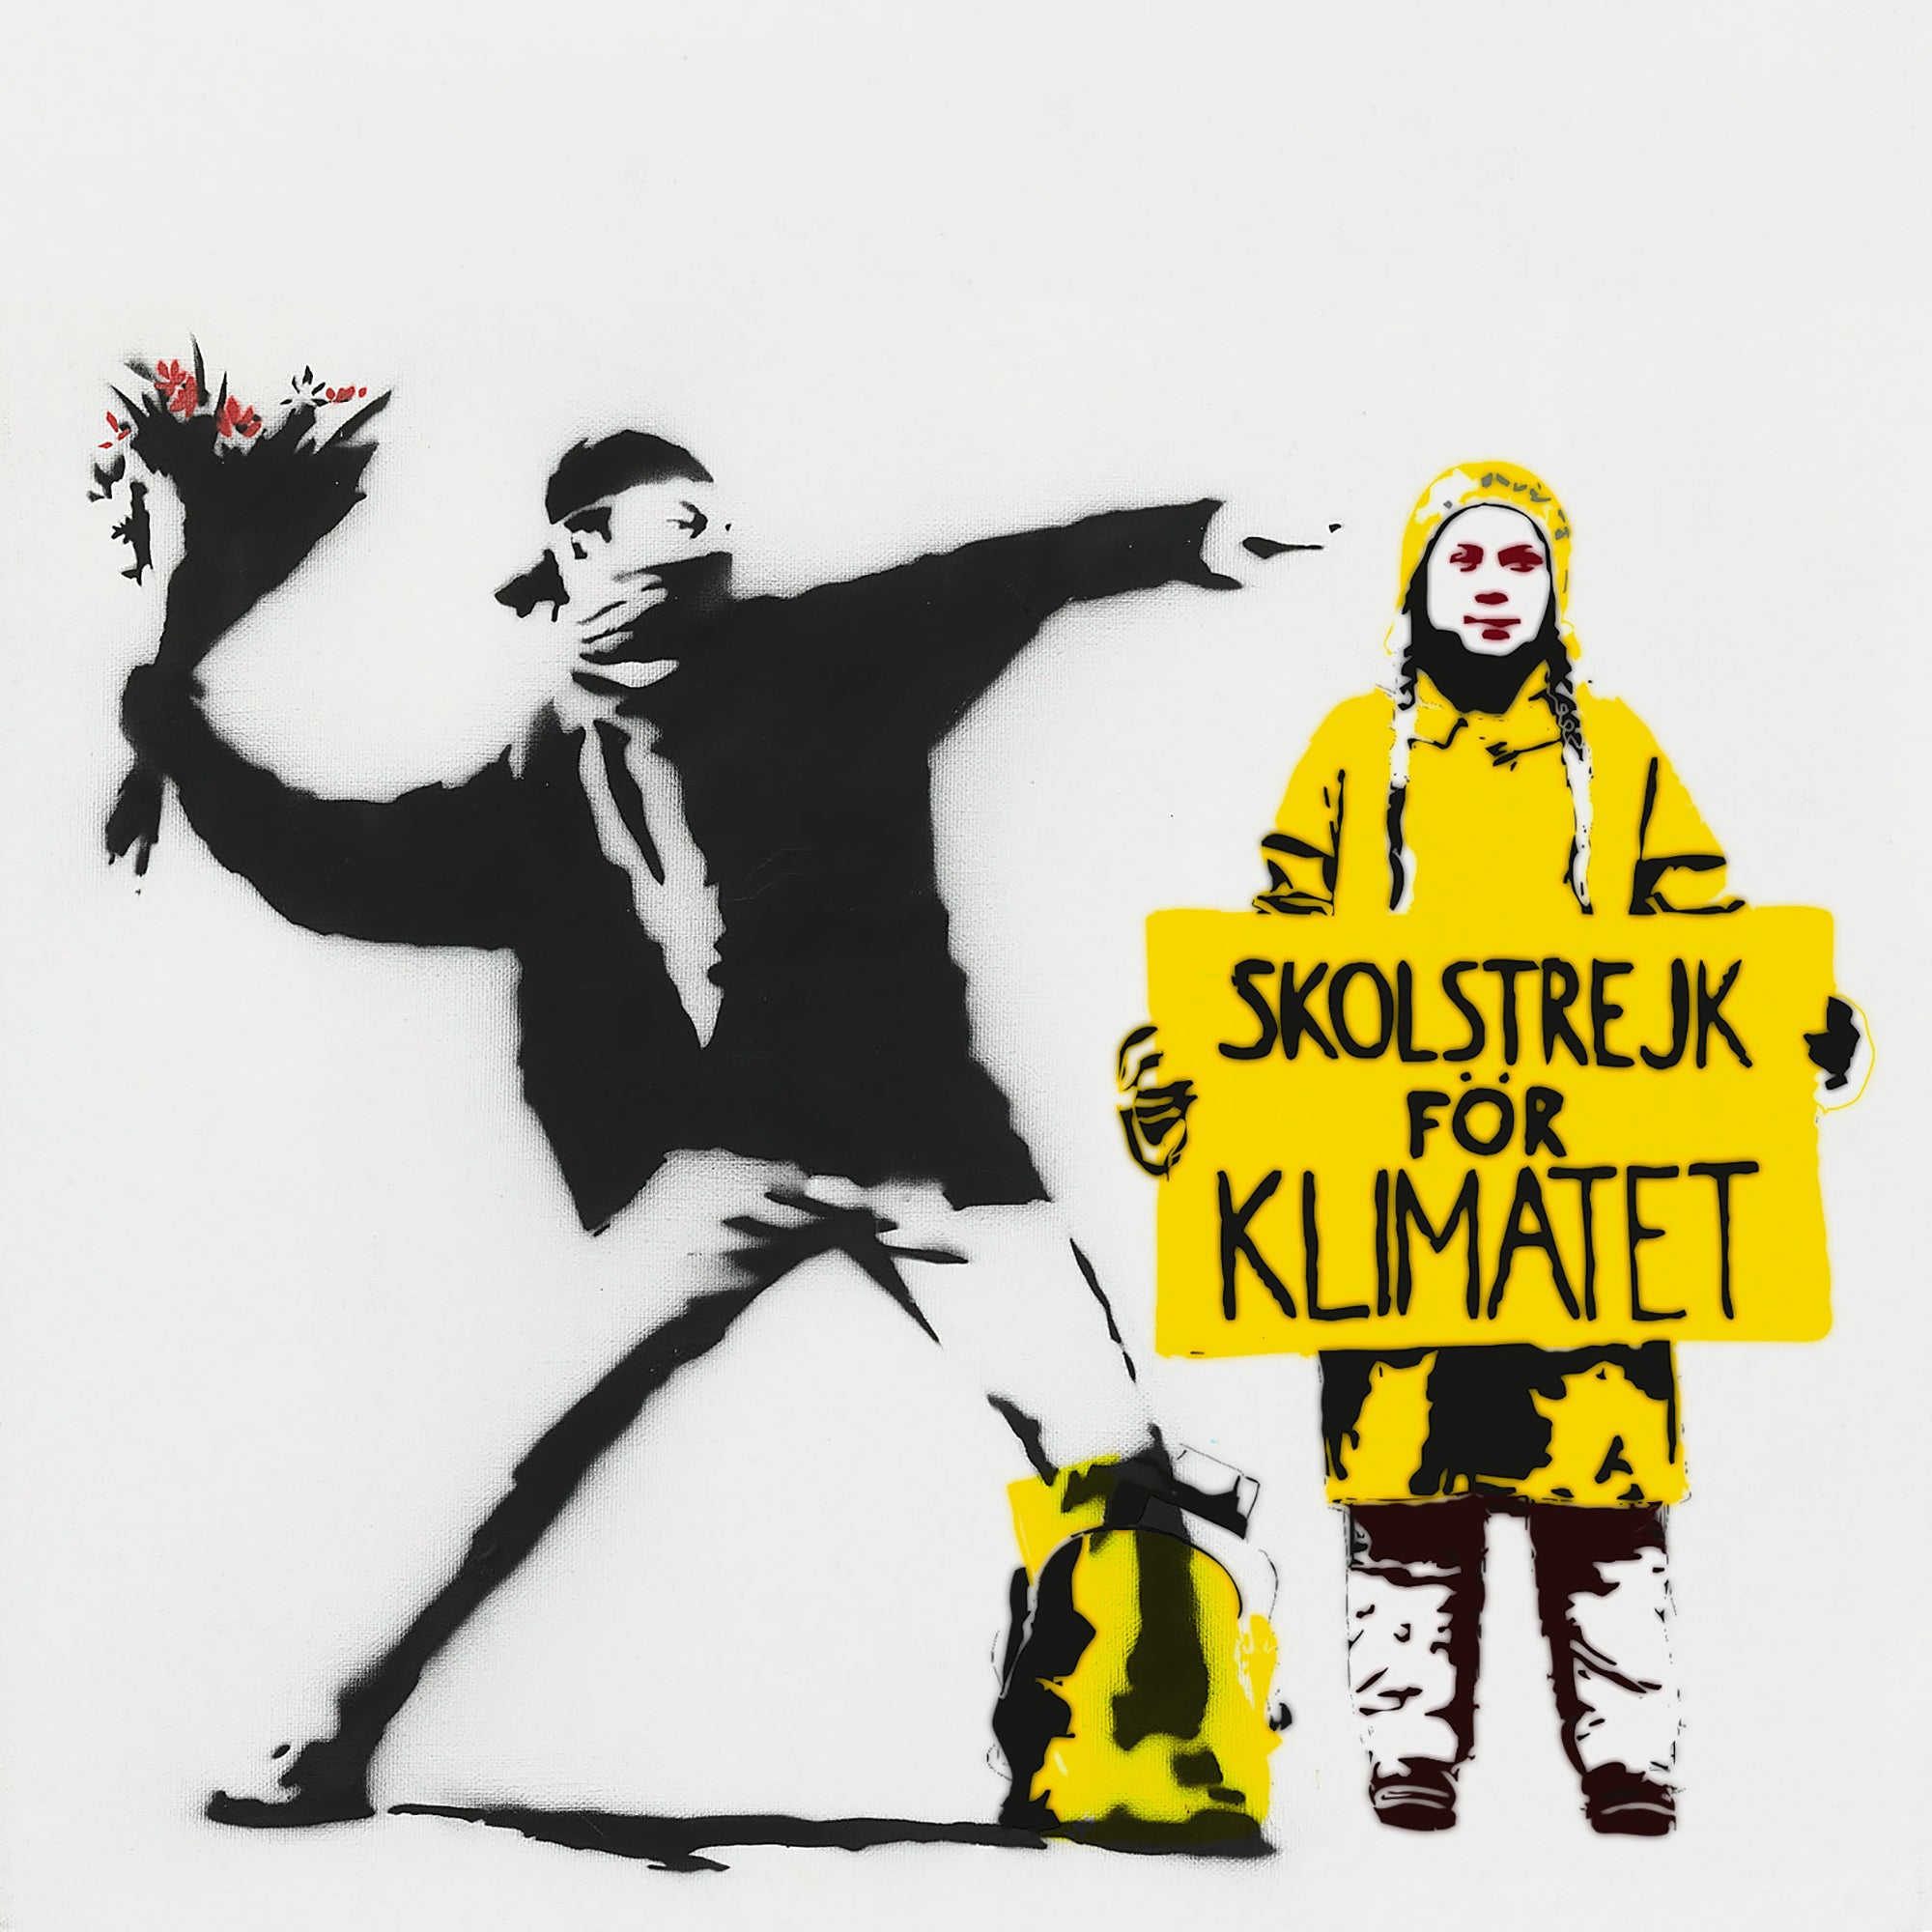 Banksy West Bank city of Bethlehem hit by :climate war by Banksy with Greta Thunberg